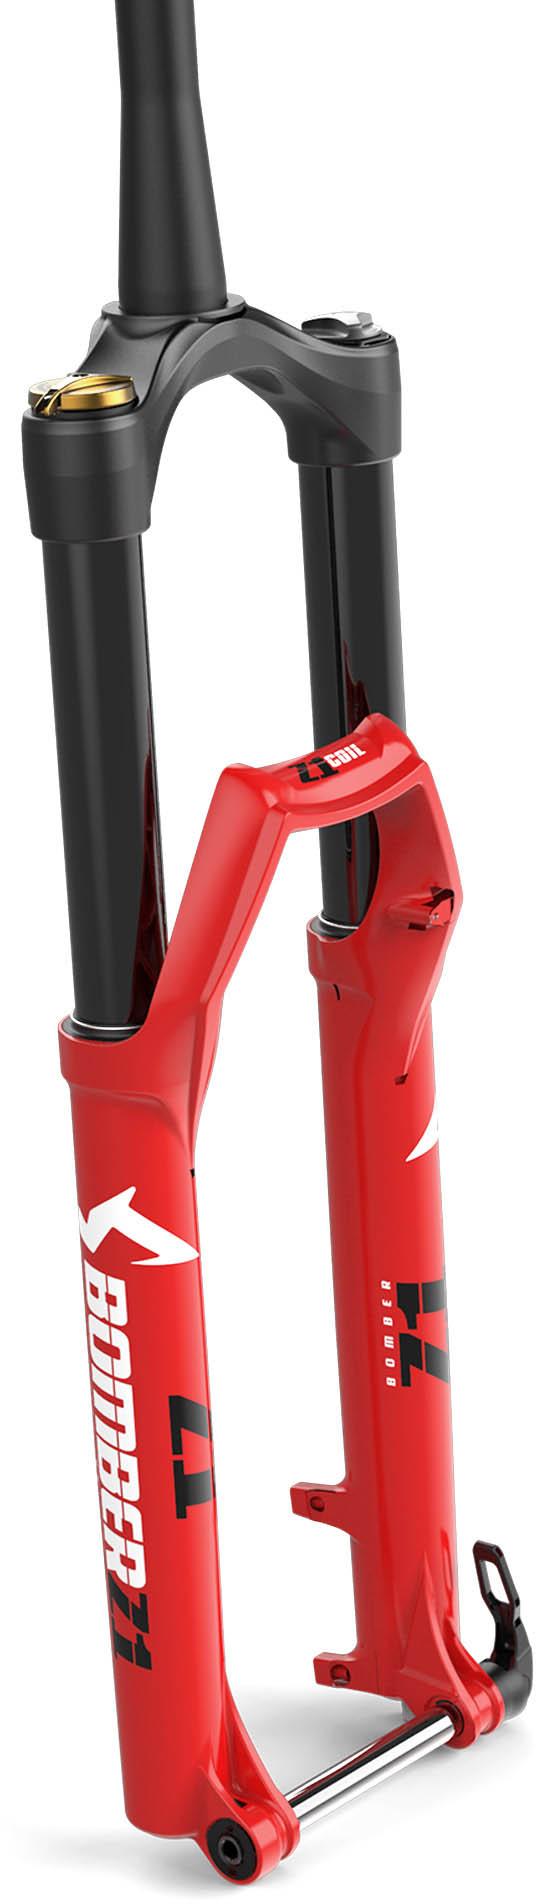 Marzocchi Bomber Z1 Coil Fork - Red